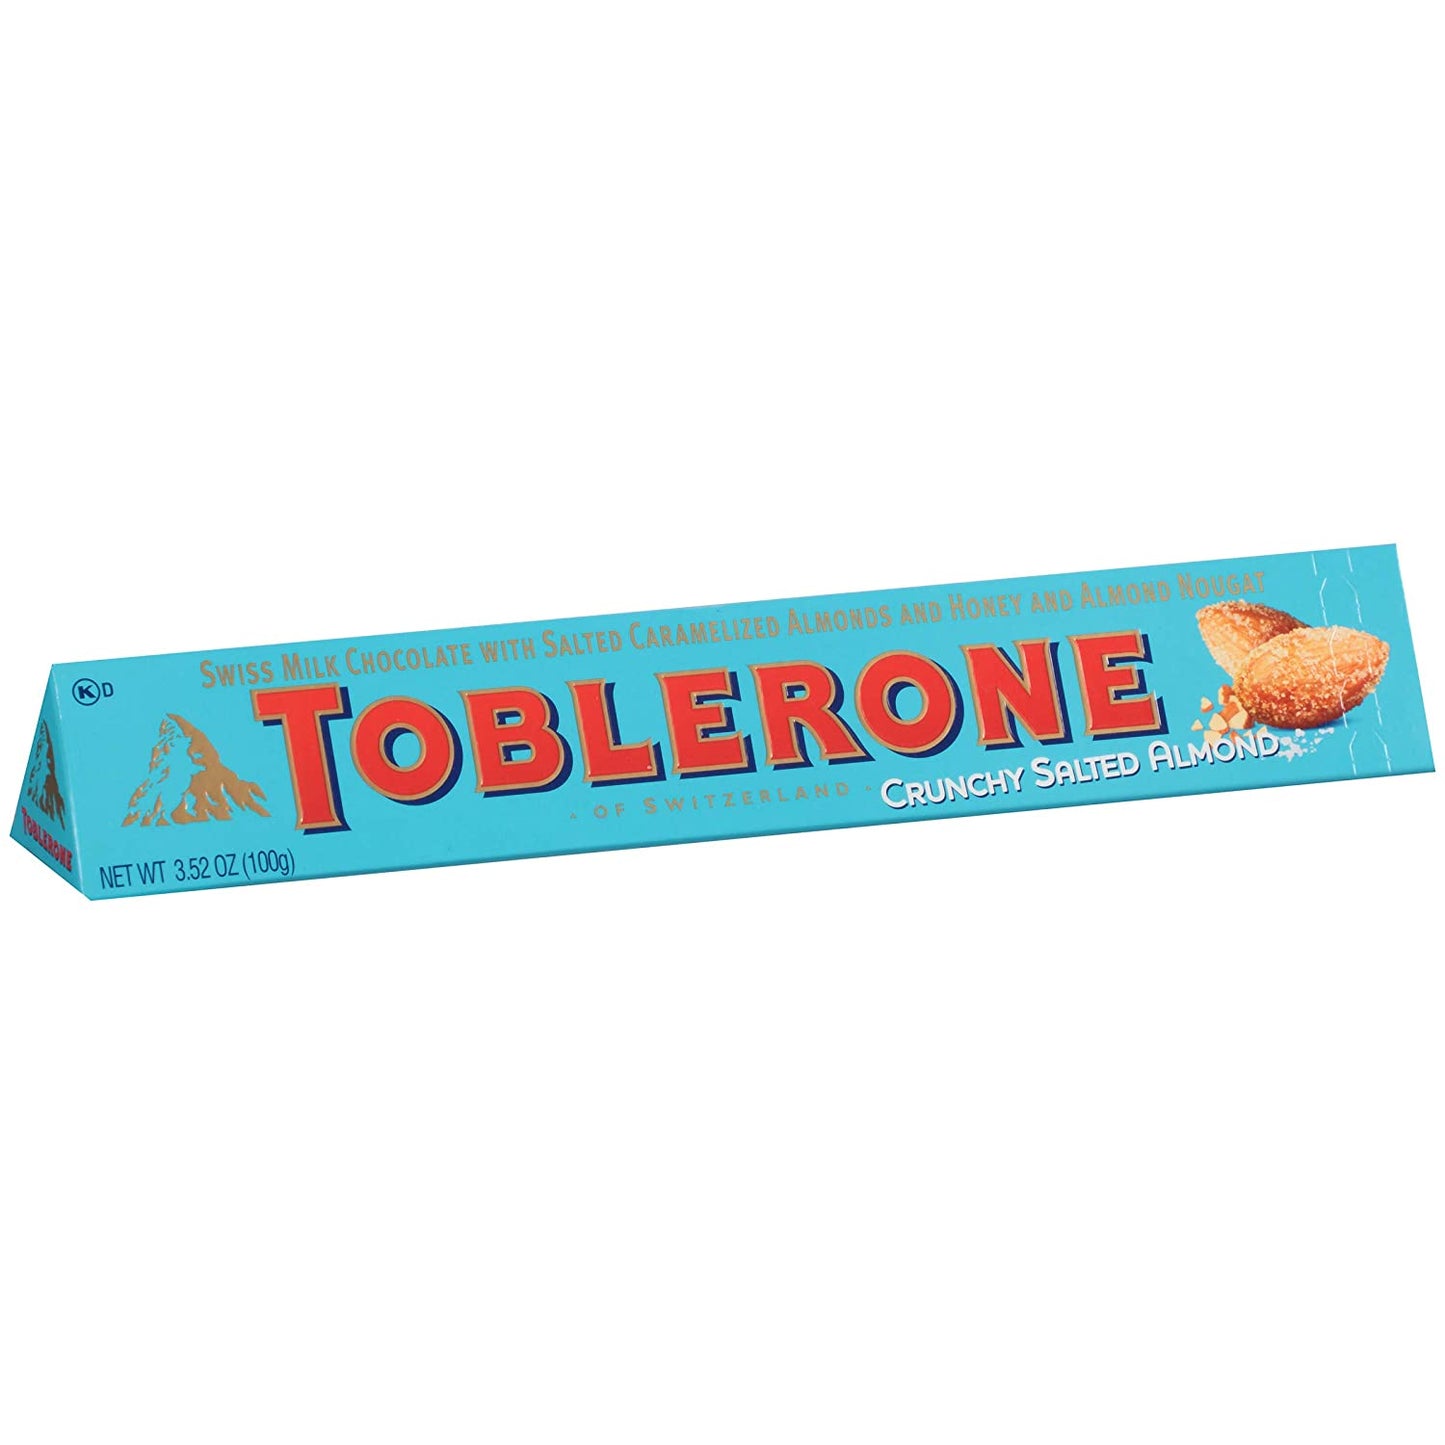 Toblerone Swiss Milk Chocolate with Salted Caramelized Almonds & Honey & Almond Nougat, Easter Chocolate, 20 - 3.52 oz Bars